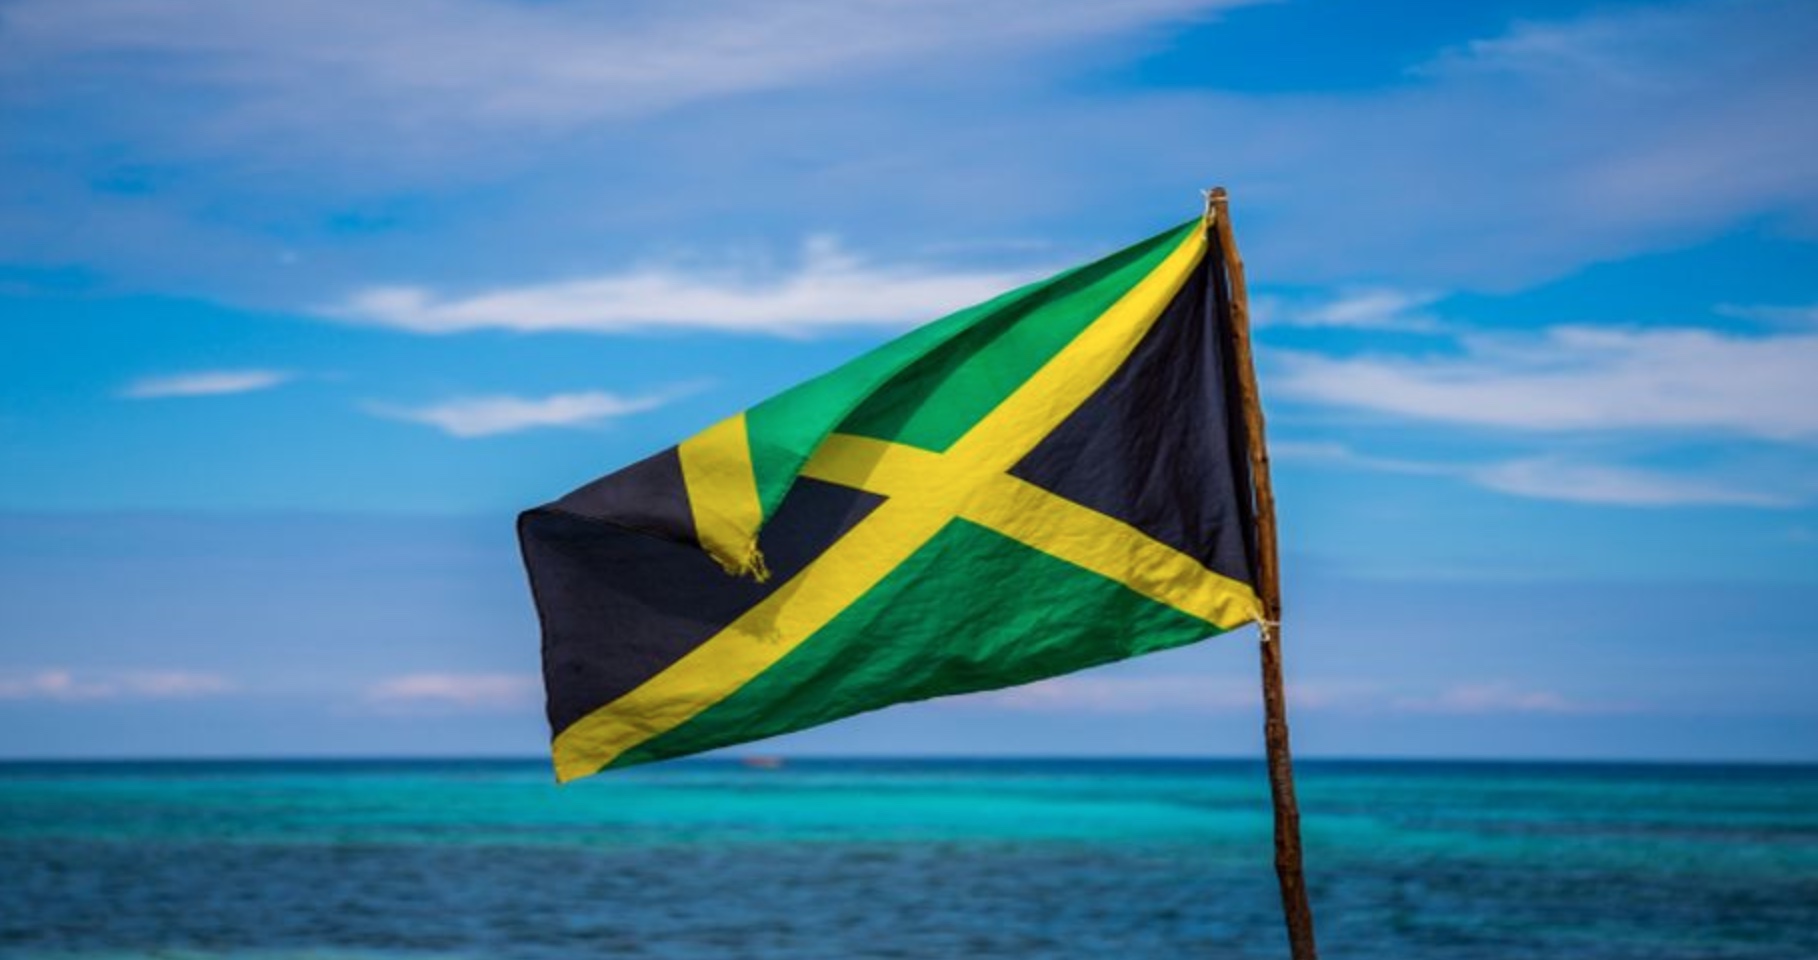 Jamaica Ranked Number One in United States Of America Visa Refusal Rates for English-Speaking Caribbean